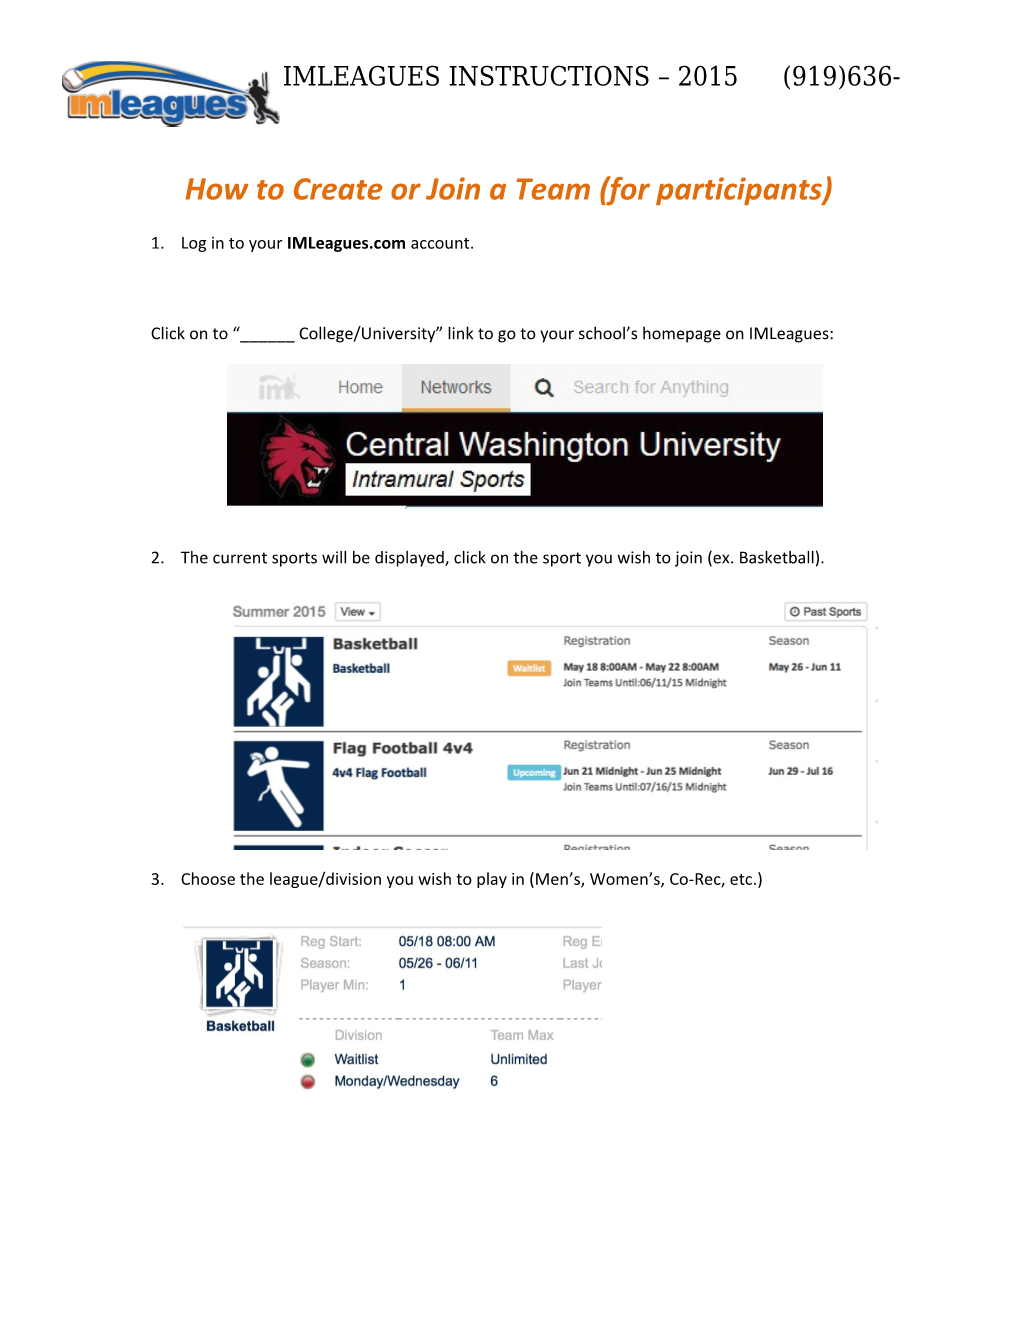 How to Create Or Join a Team (For Participants)